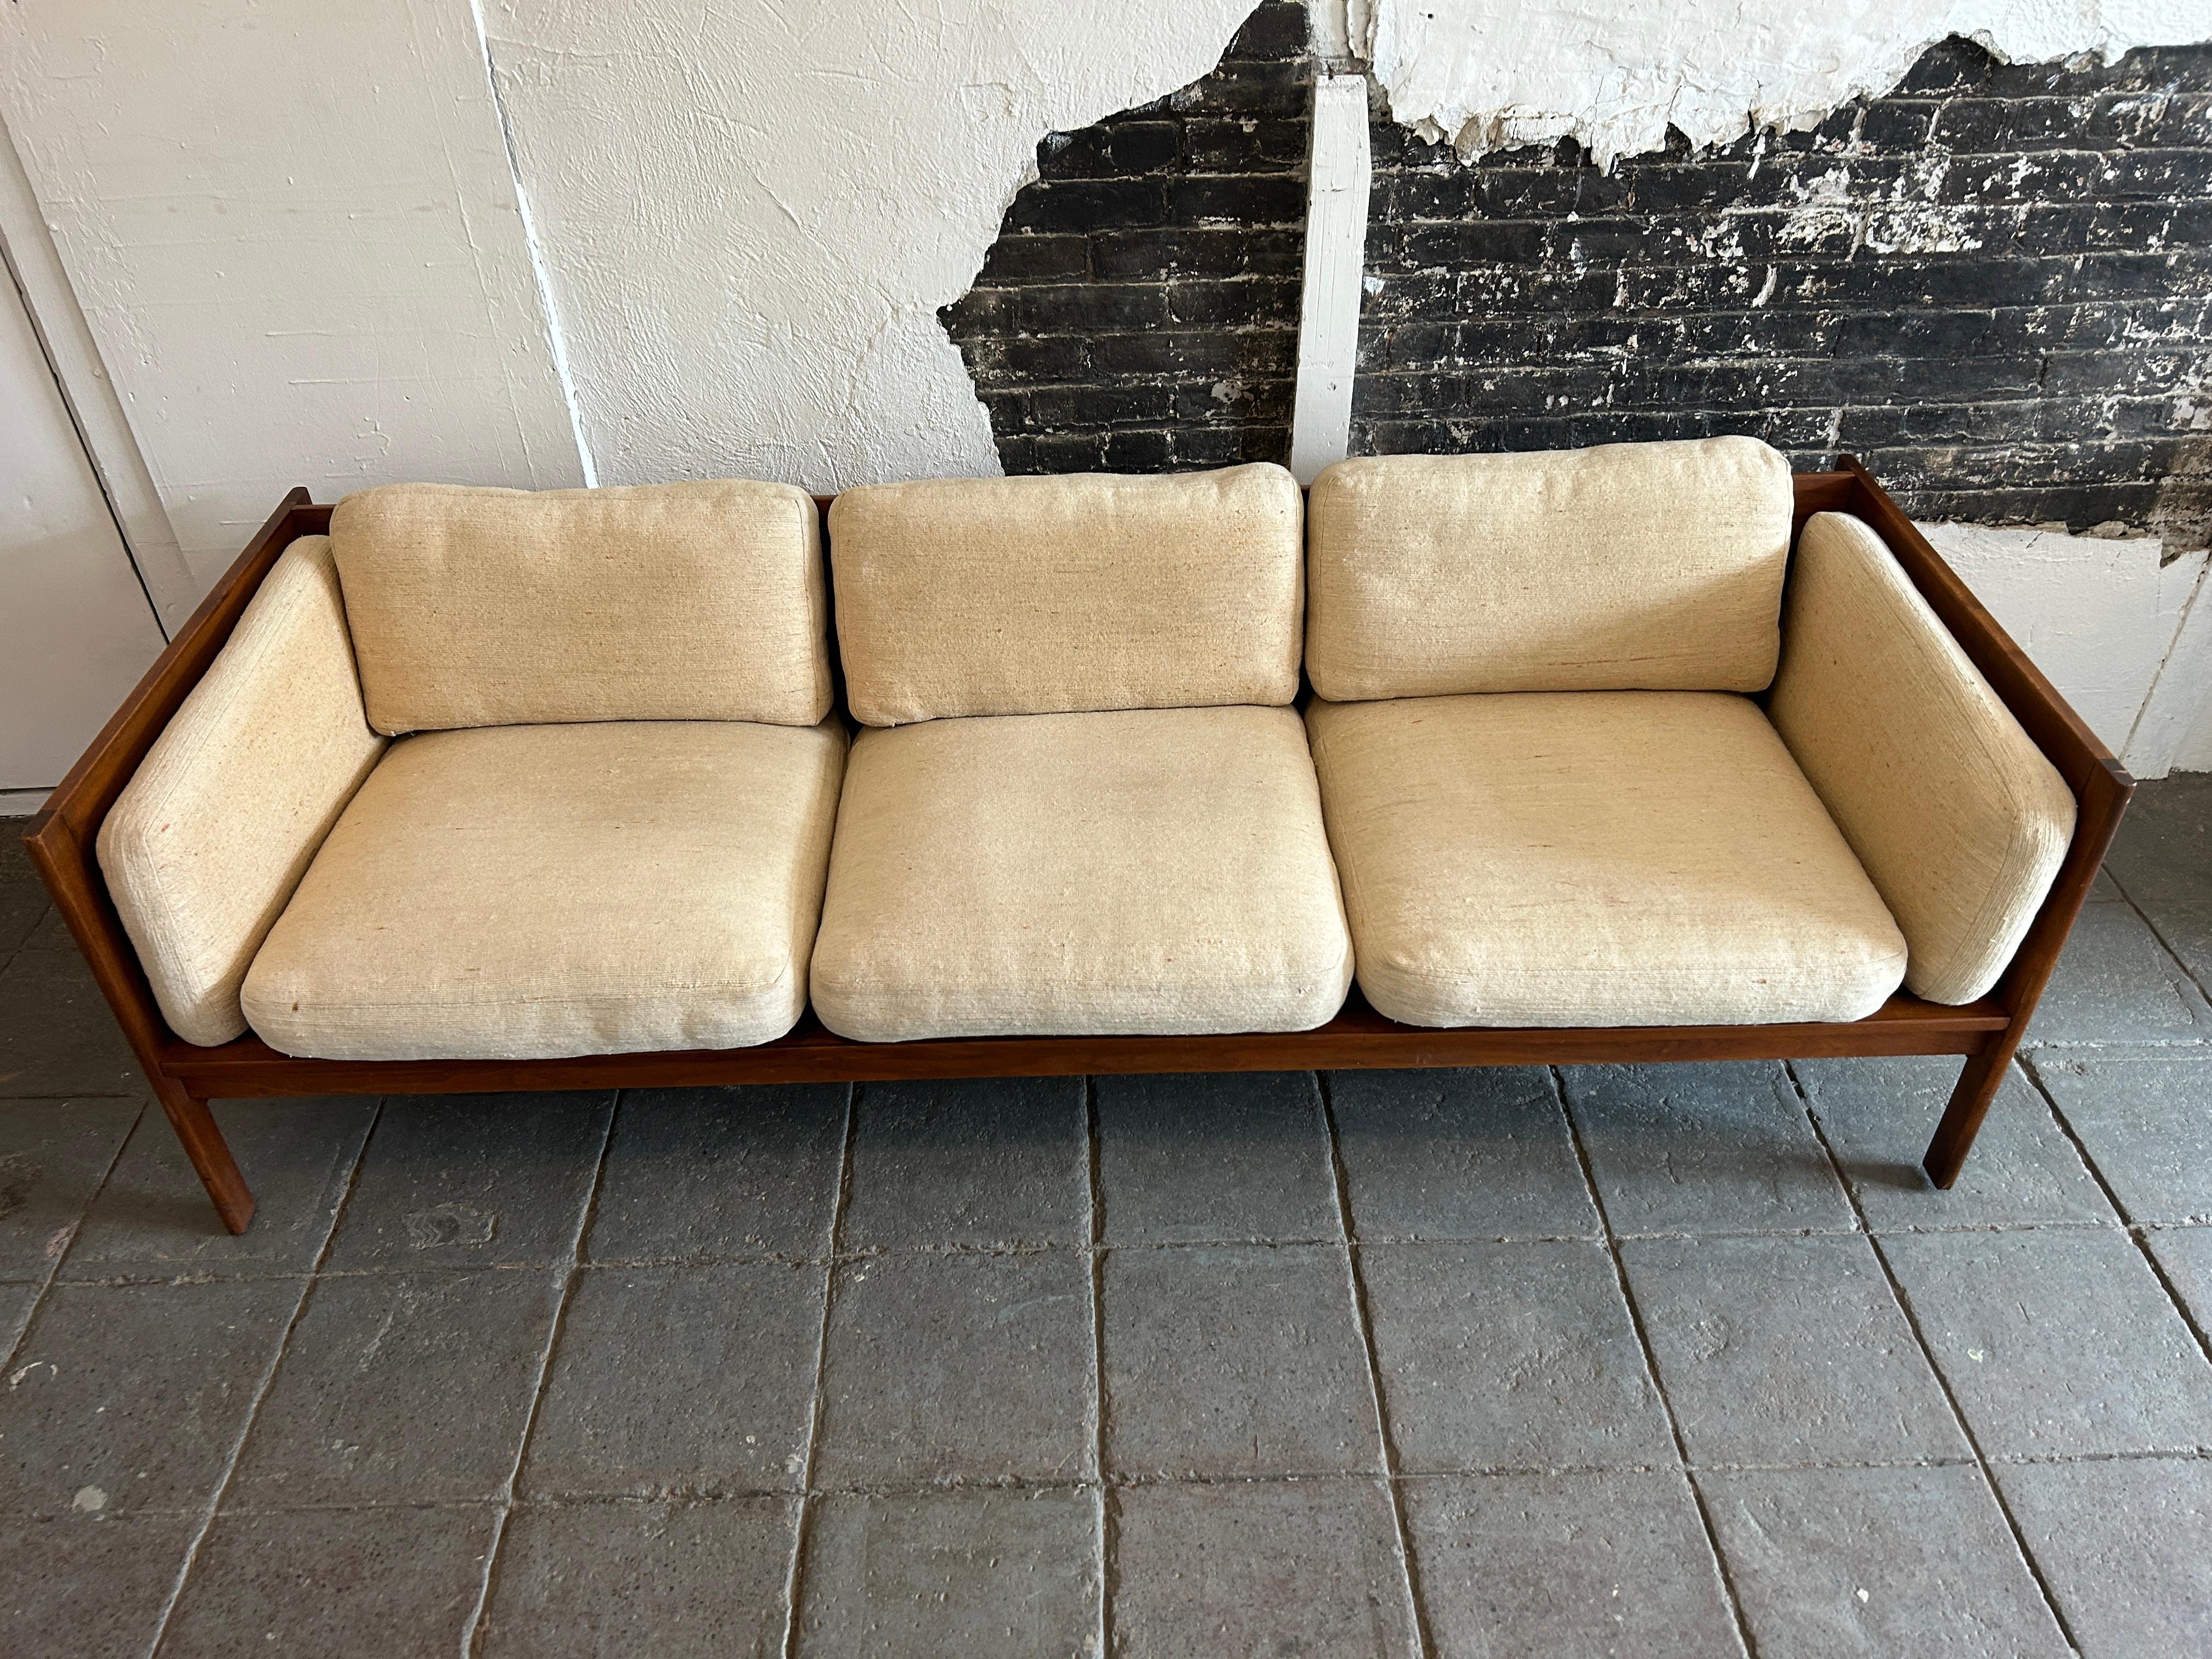 Midcentury walnut platform armed 3 seat Studio Craft sofa daybed. Has off white linen woven high end upholstery with heavy cushions. In vintage condition. Frame is very unique. Use as is or have it reupholstered. By Richard Artschwager at The